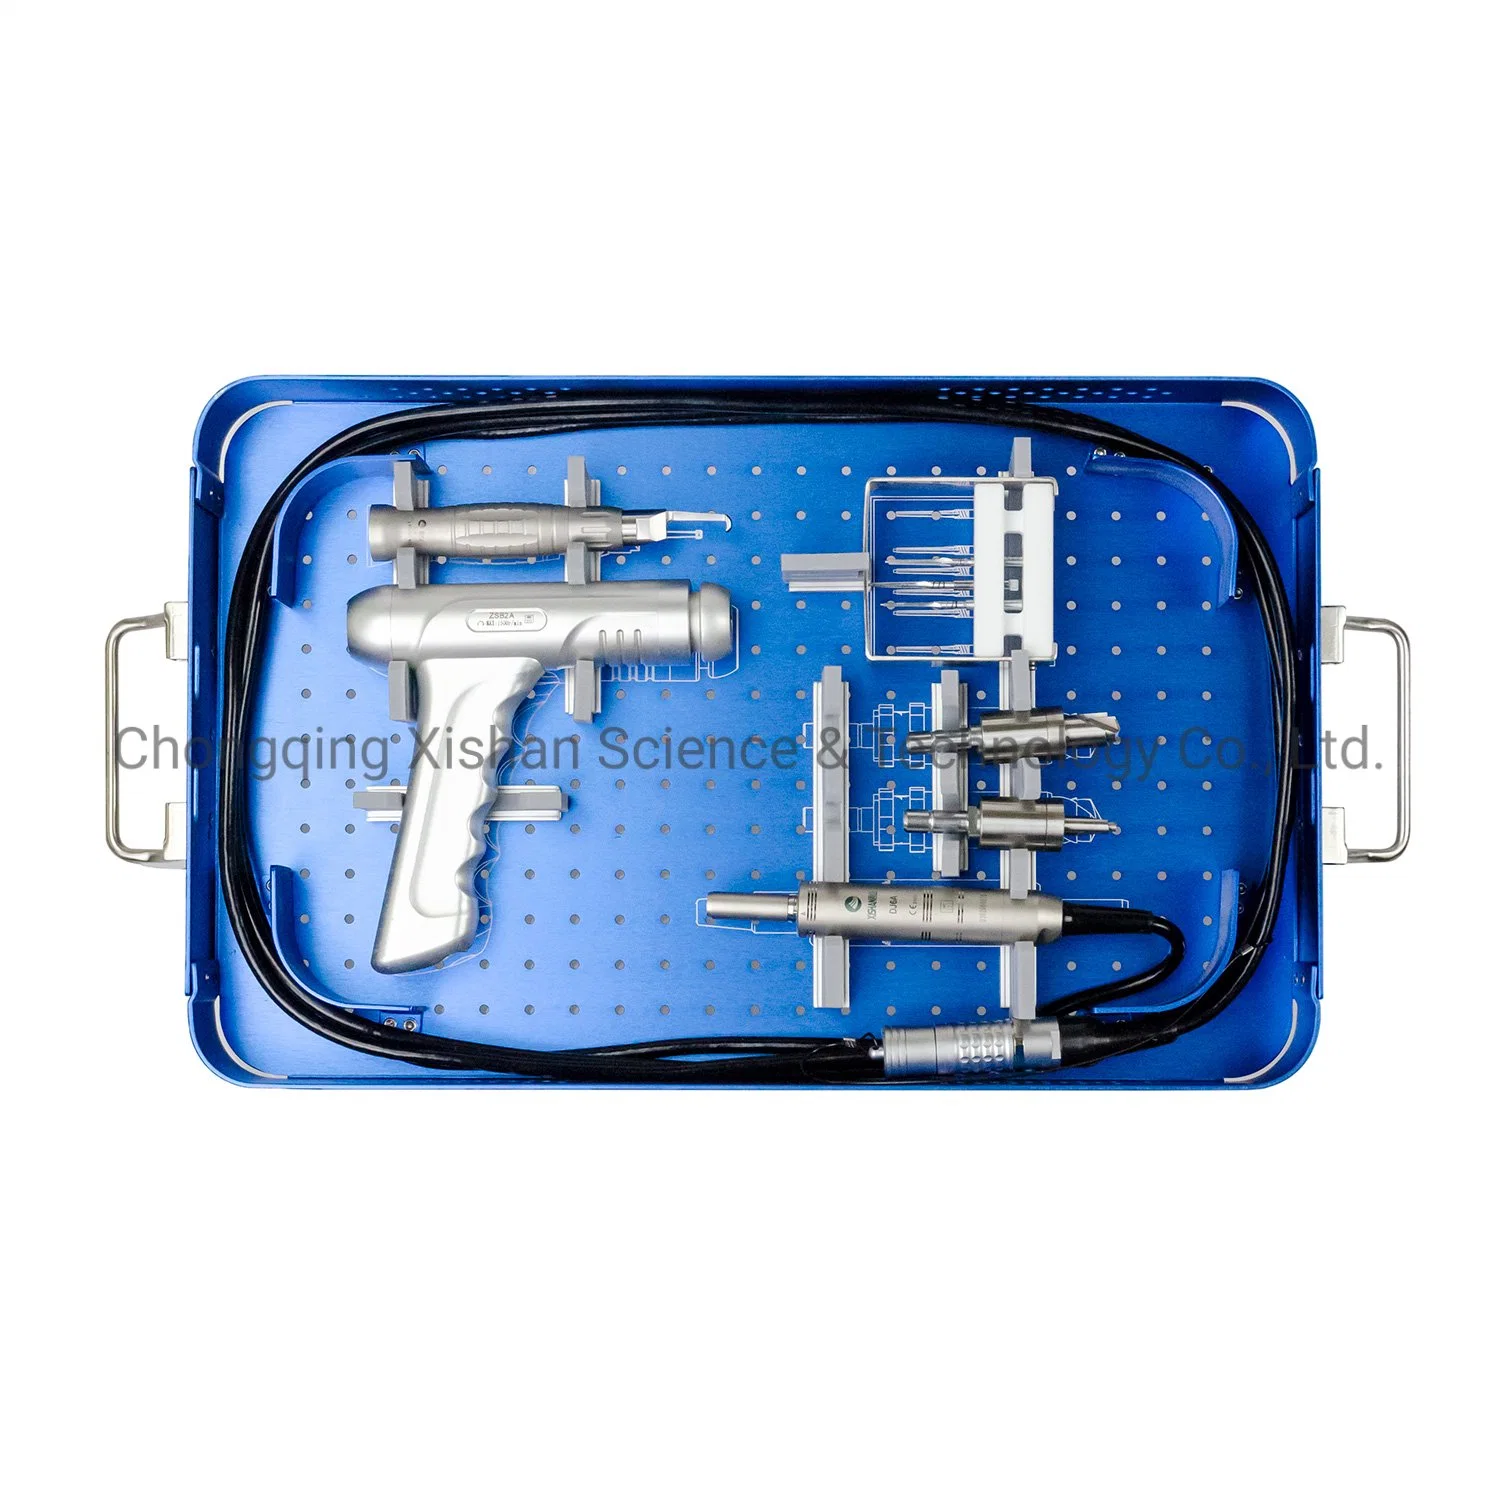 Medical Product Surgical Power Drill/Cranio/Device for Neurosurgery/Craniotomy/Skull Open Machine/Neuro Dril/Perforator